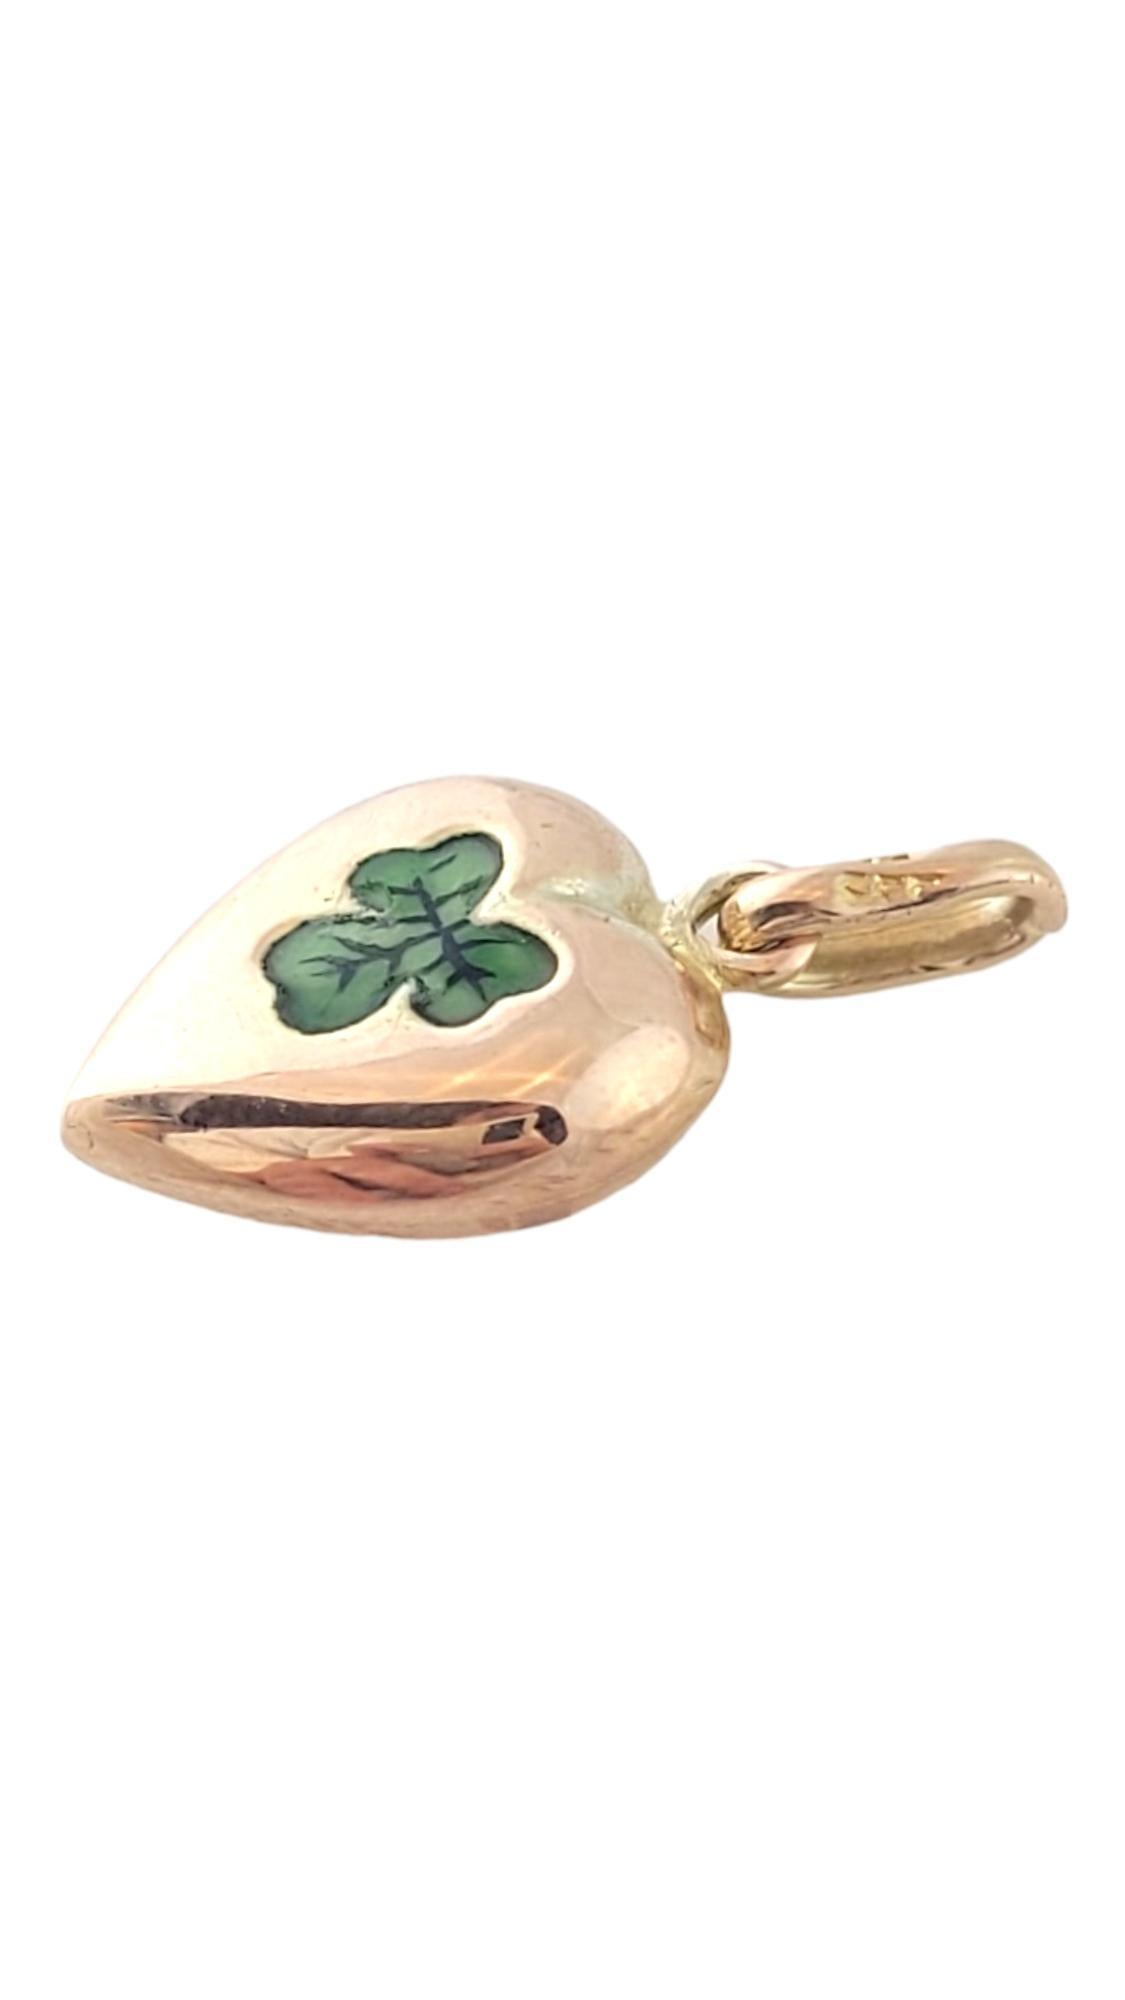 Vintage 10K Yellow Gold Puffed Heart with Enamel Shamrock Charm

This adorable, puffed heart charm is decorated with a green enamel shamrock for good luck!

Size: 15.59mm X 11.32mm X 4.48mm

Weight: 0.65 dwt/ 1.01 g

Hallmark: 10K crr

Very good